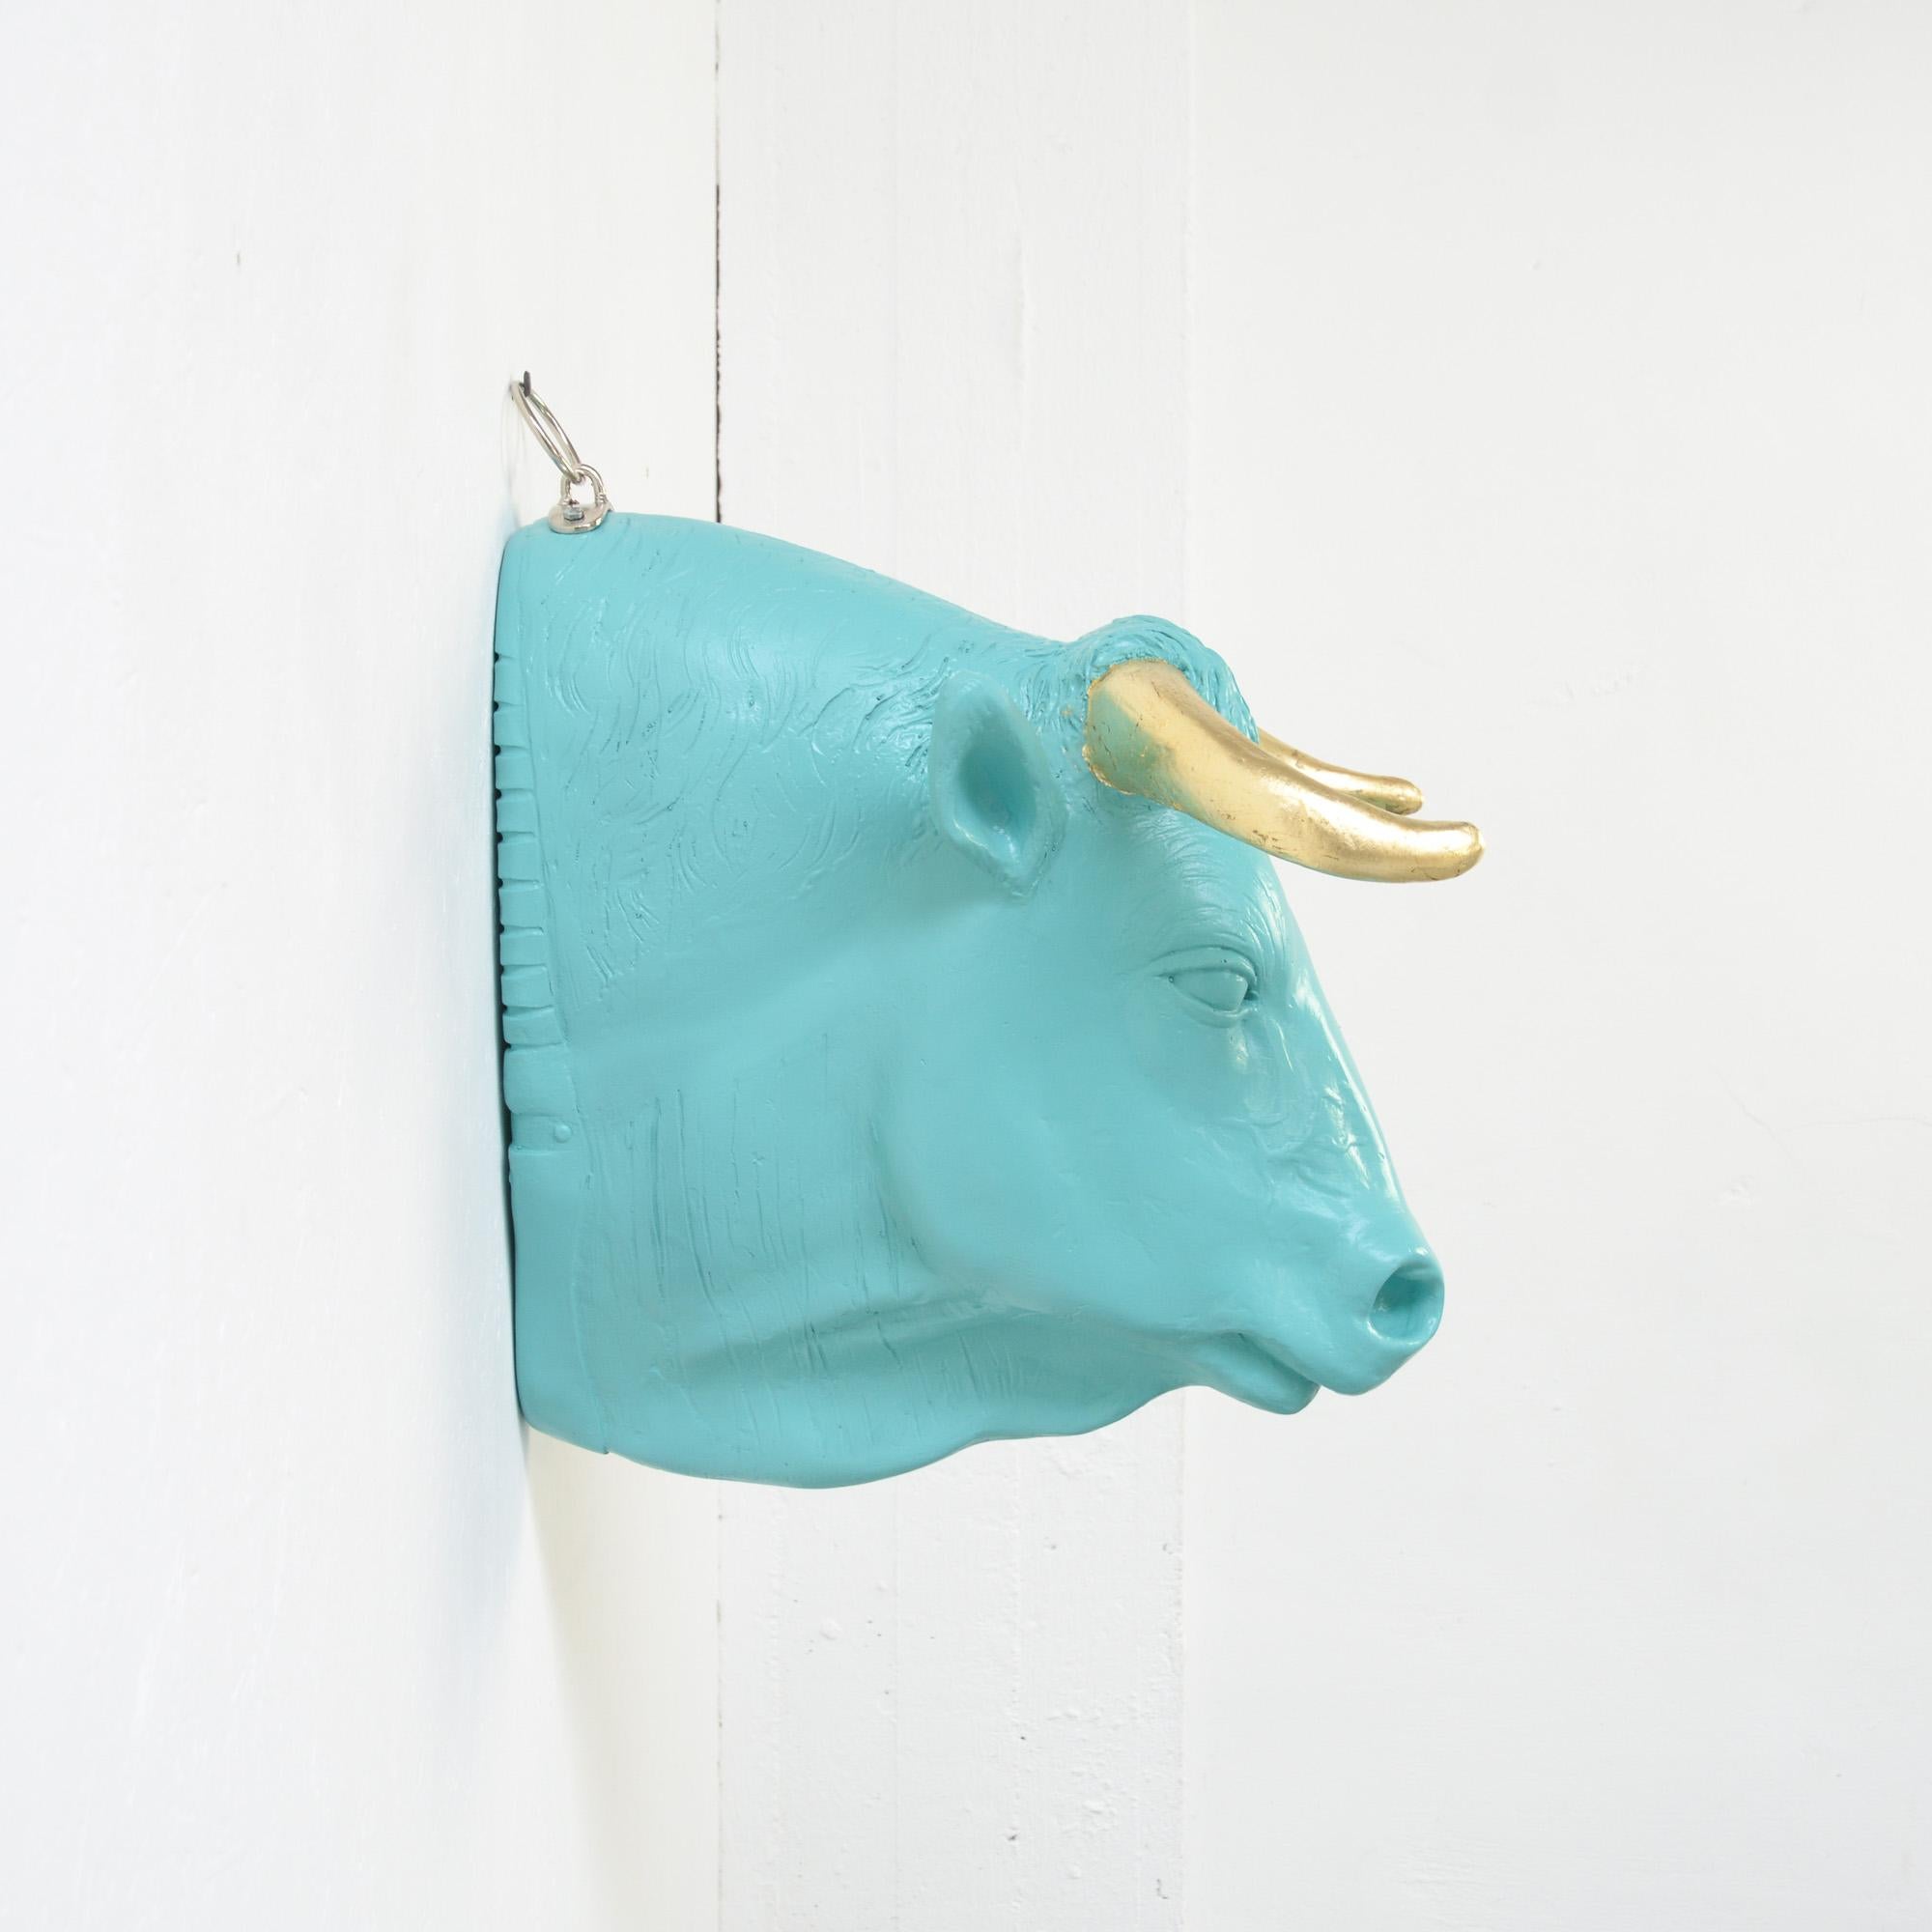 Other Turquoise Bullsit by Hans Weyers, 2019